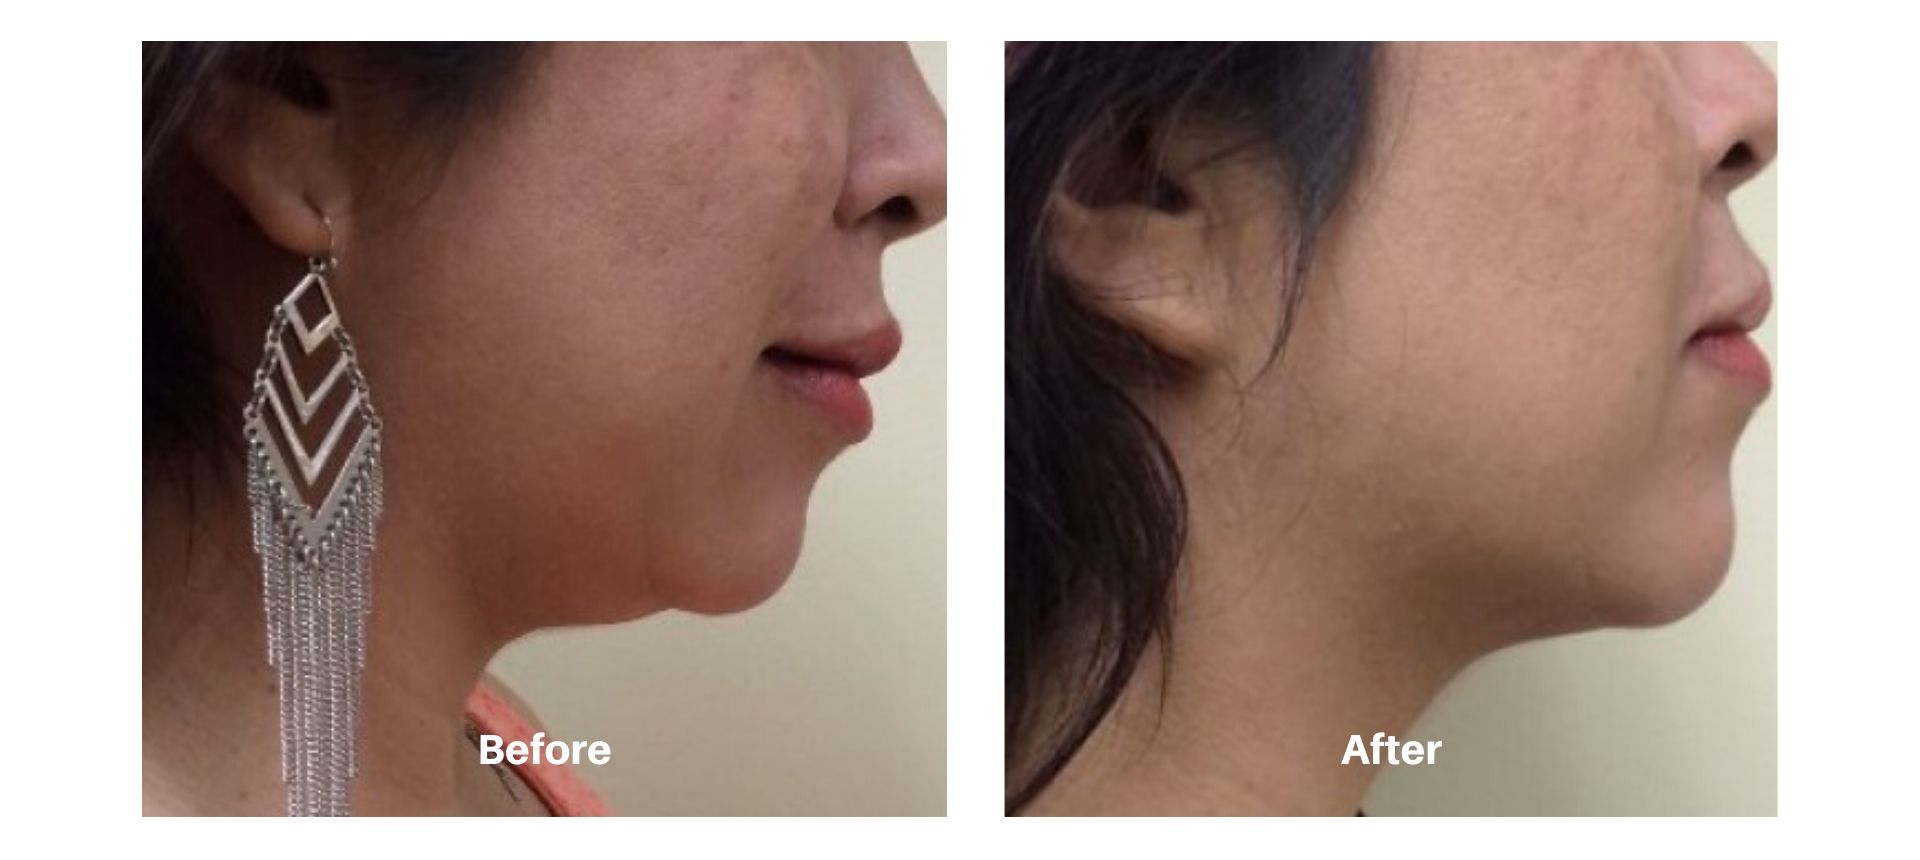 Woman's before and after images from Kybella treatment at Always Beautiful.